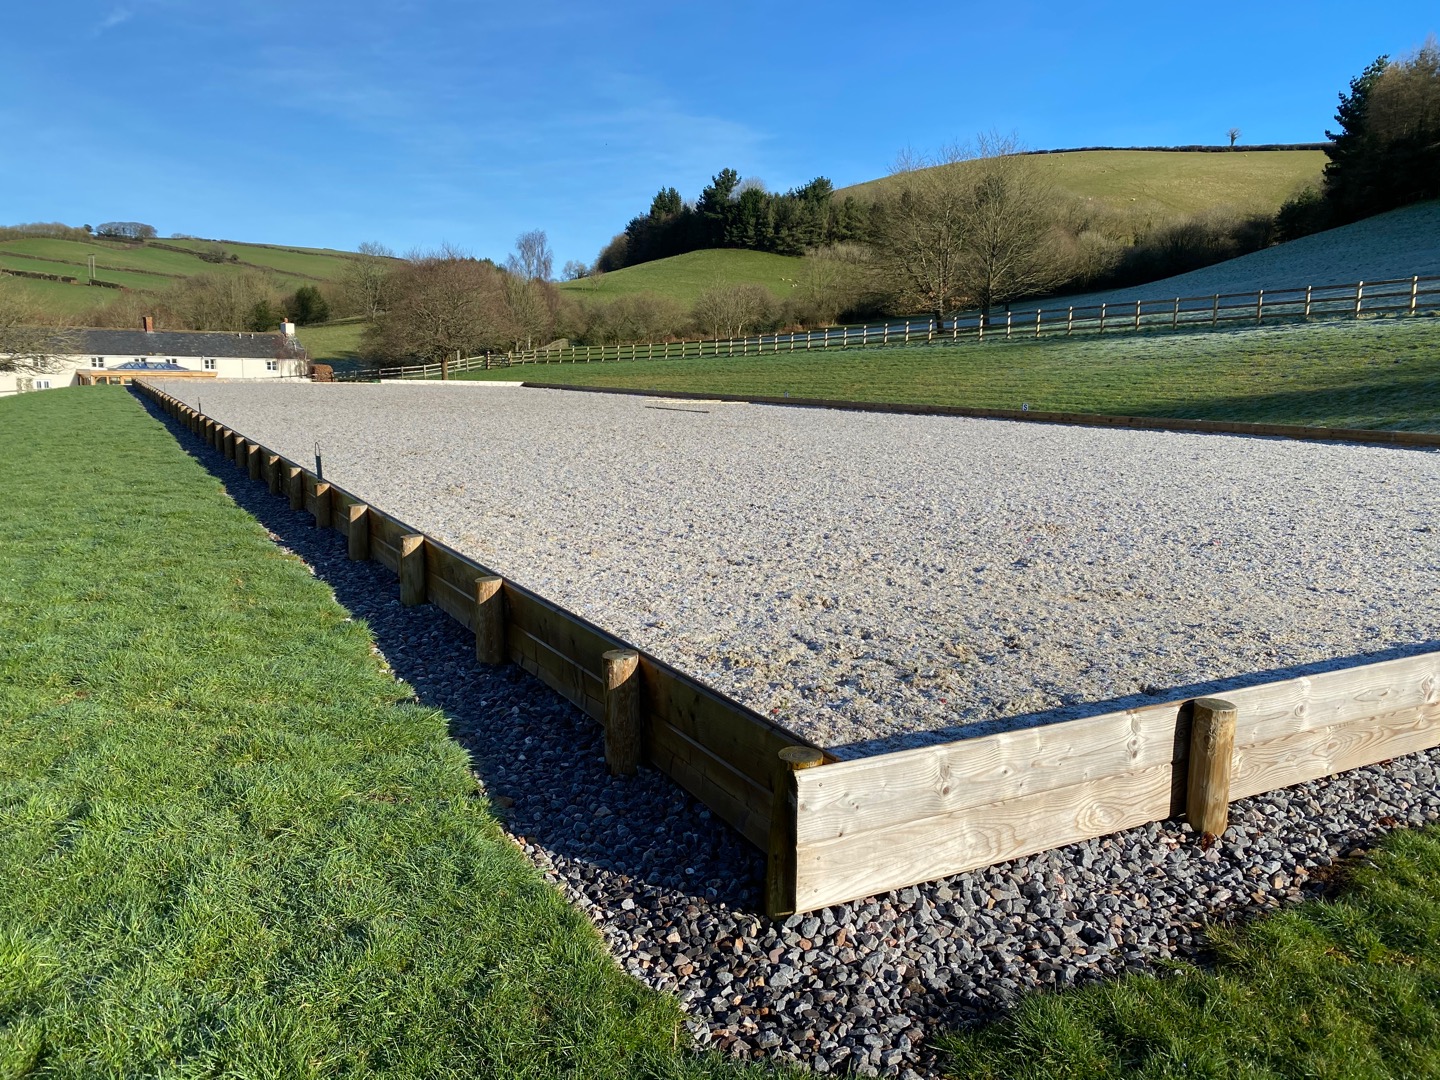 30m x 50m riding arena with waxed sand surface